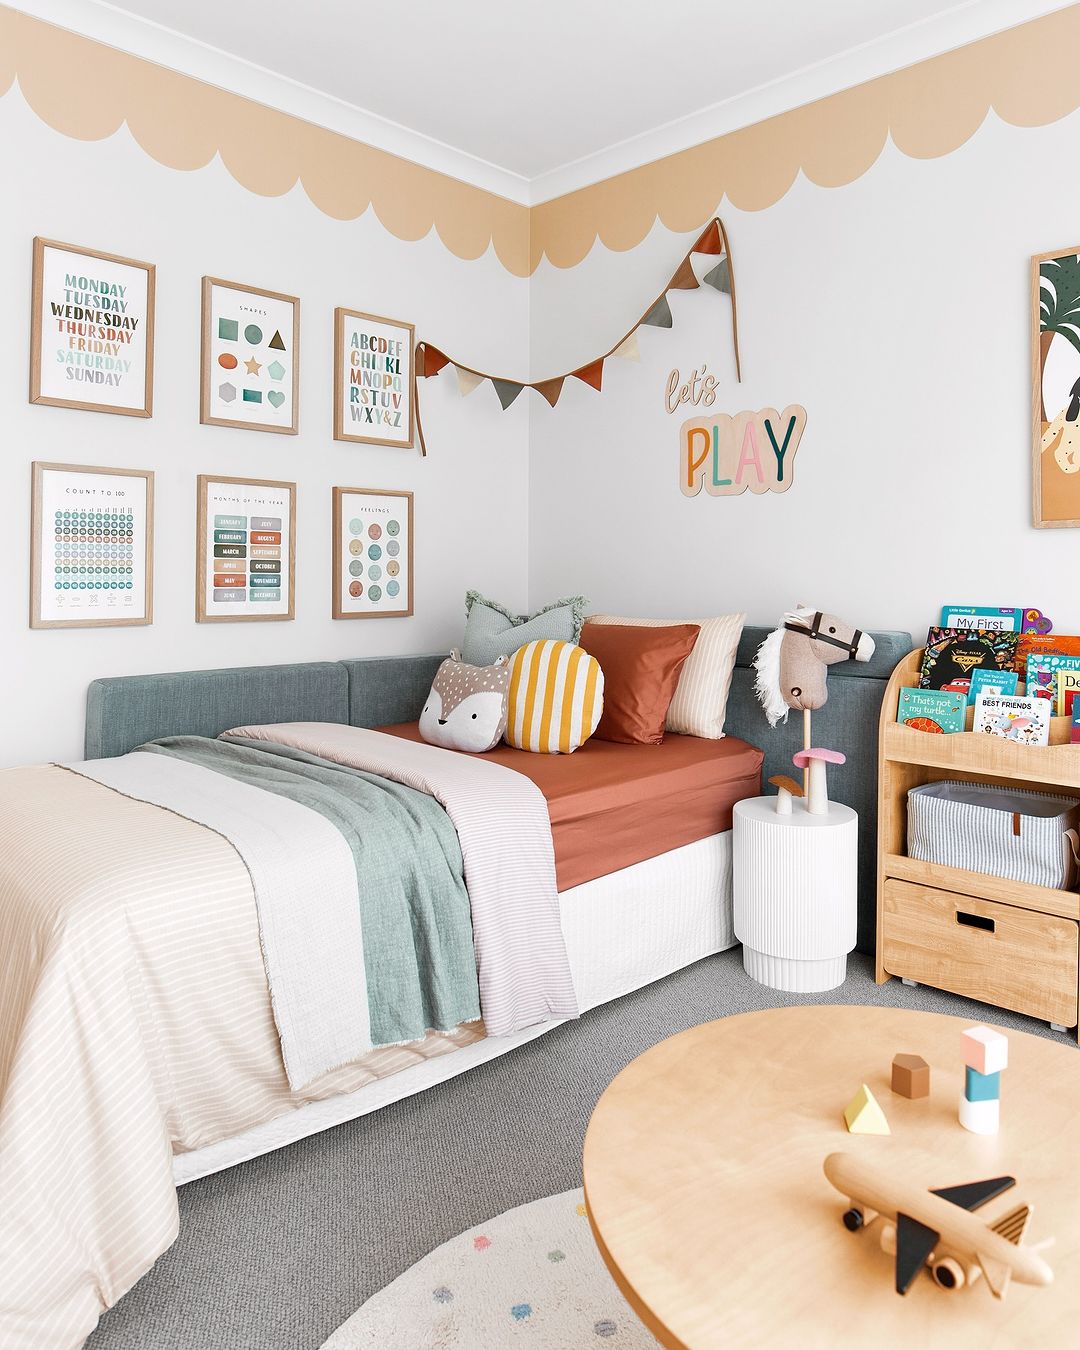 A cozy children's bedroom with a bed featuring multi-colored bedding and decorative pillows. The walls are adorned with framed educational posters and a playful scalloped wallpaper border in a soft peach color near the ceiling.